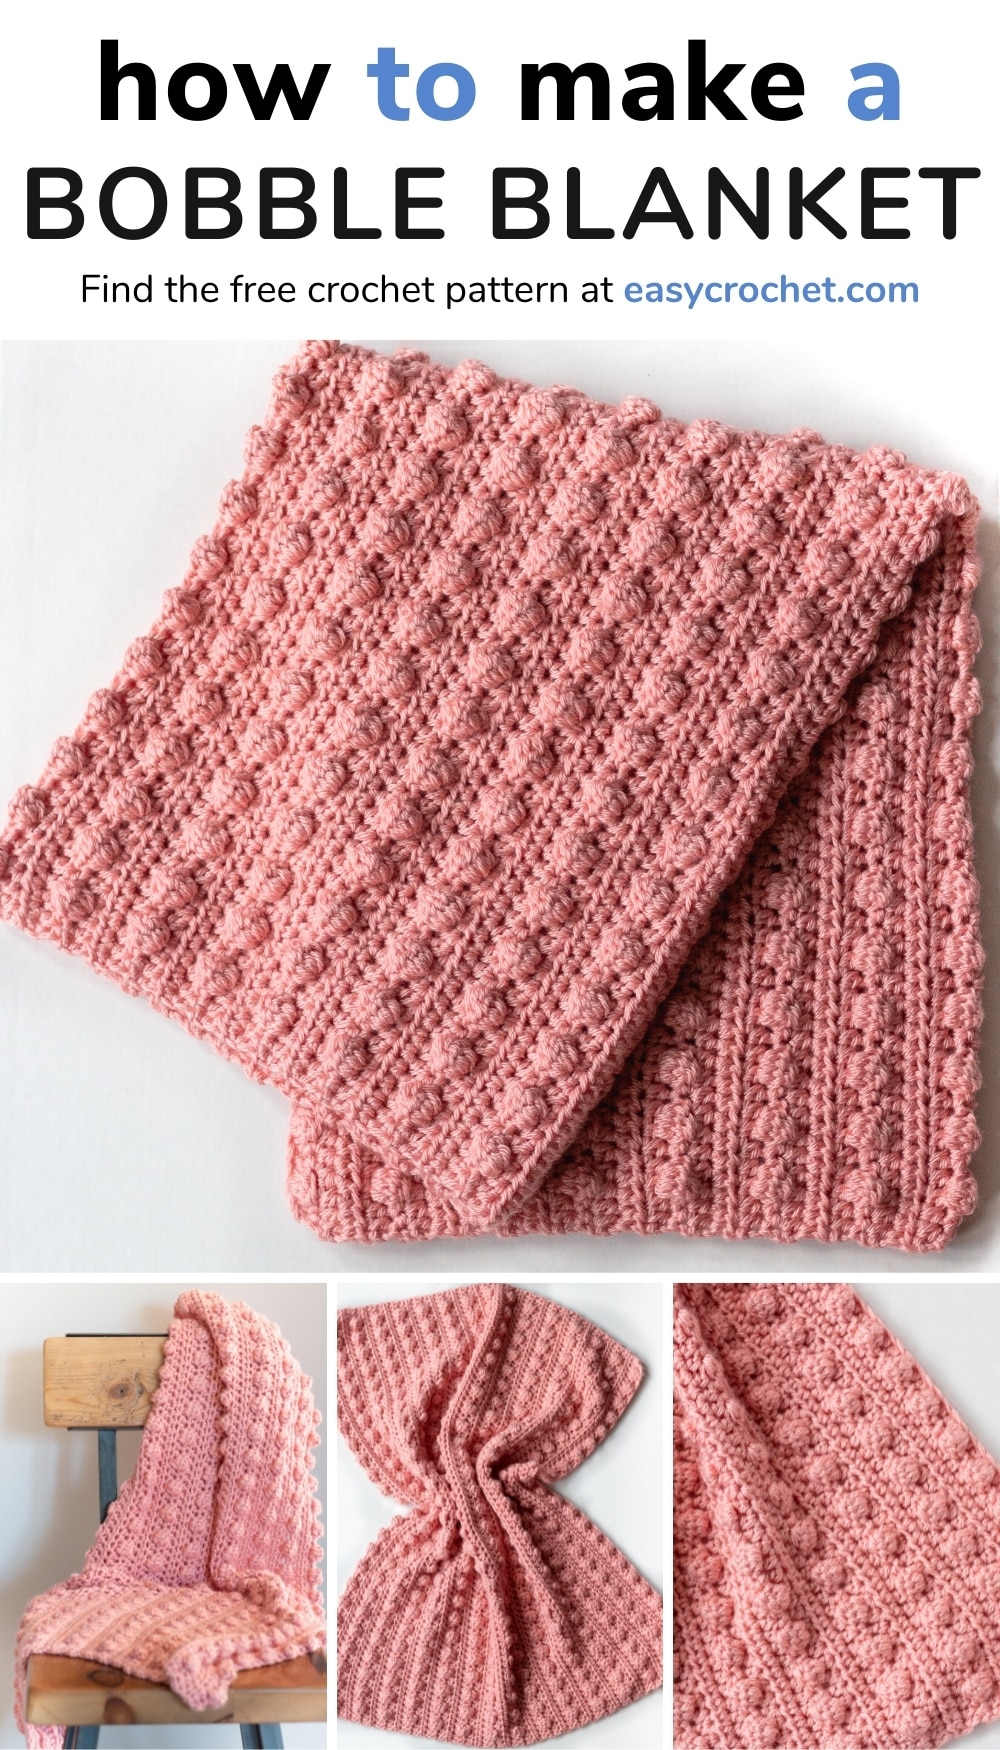 Crochet blanket using the bobble stitch. Can be crocheted into 8 different blanket sizes! Get the free crochet pattern at easycrochet.com